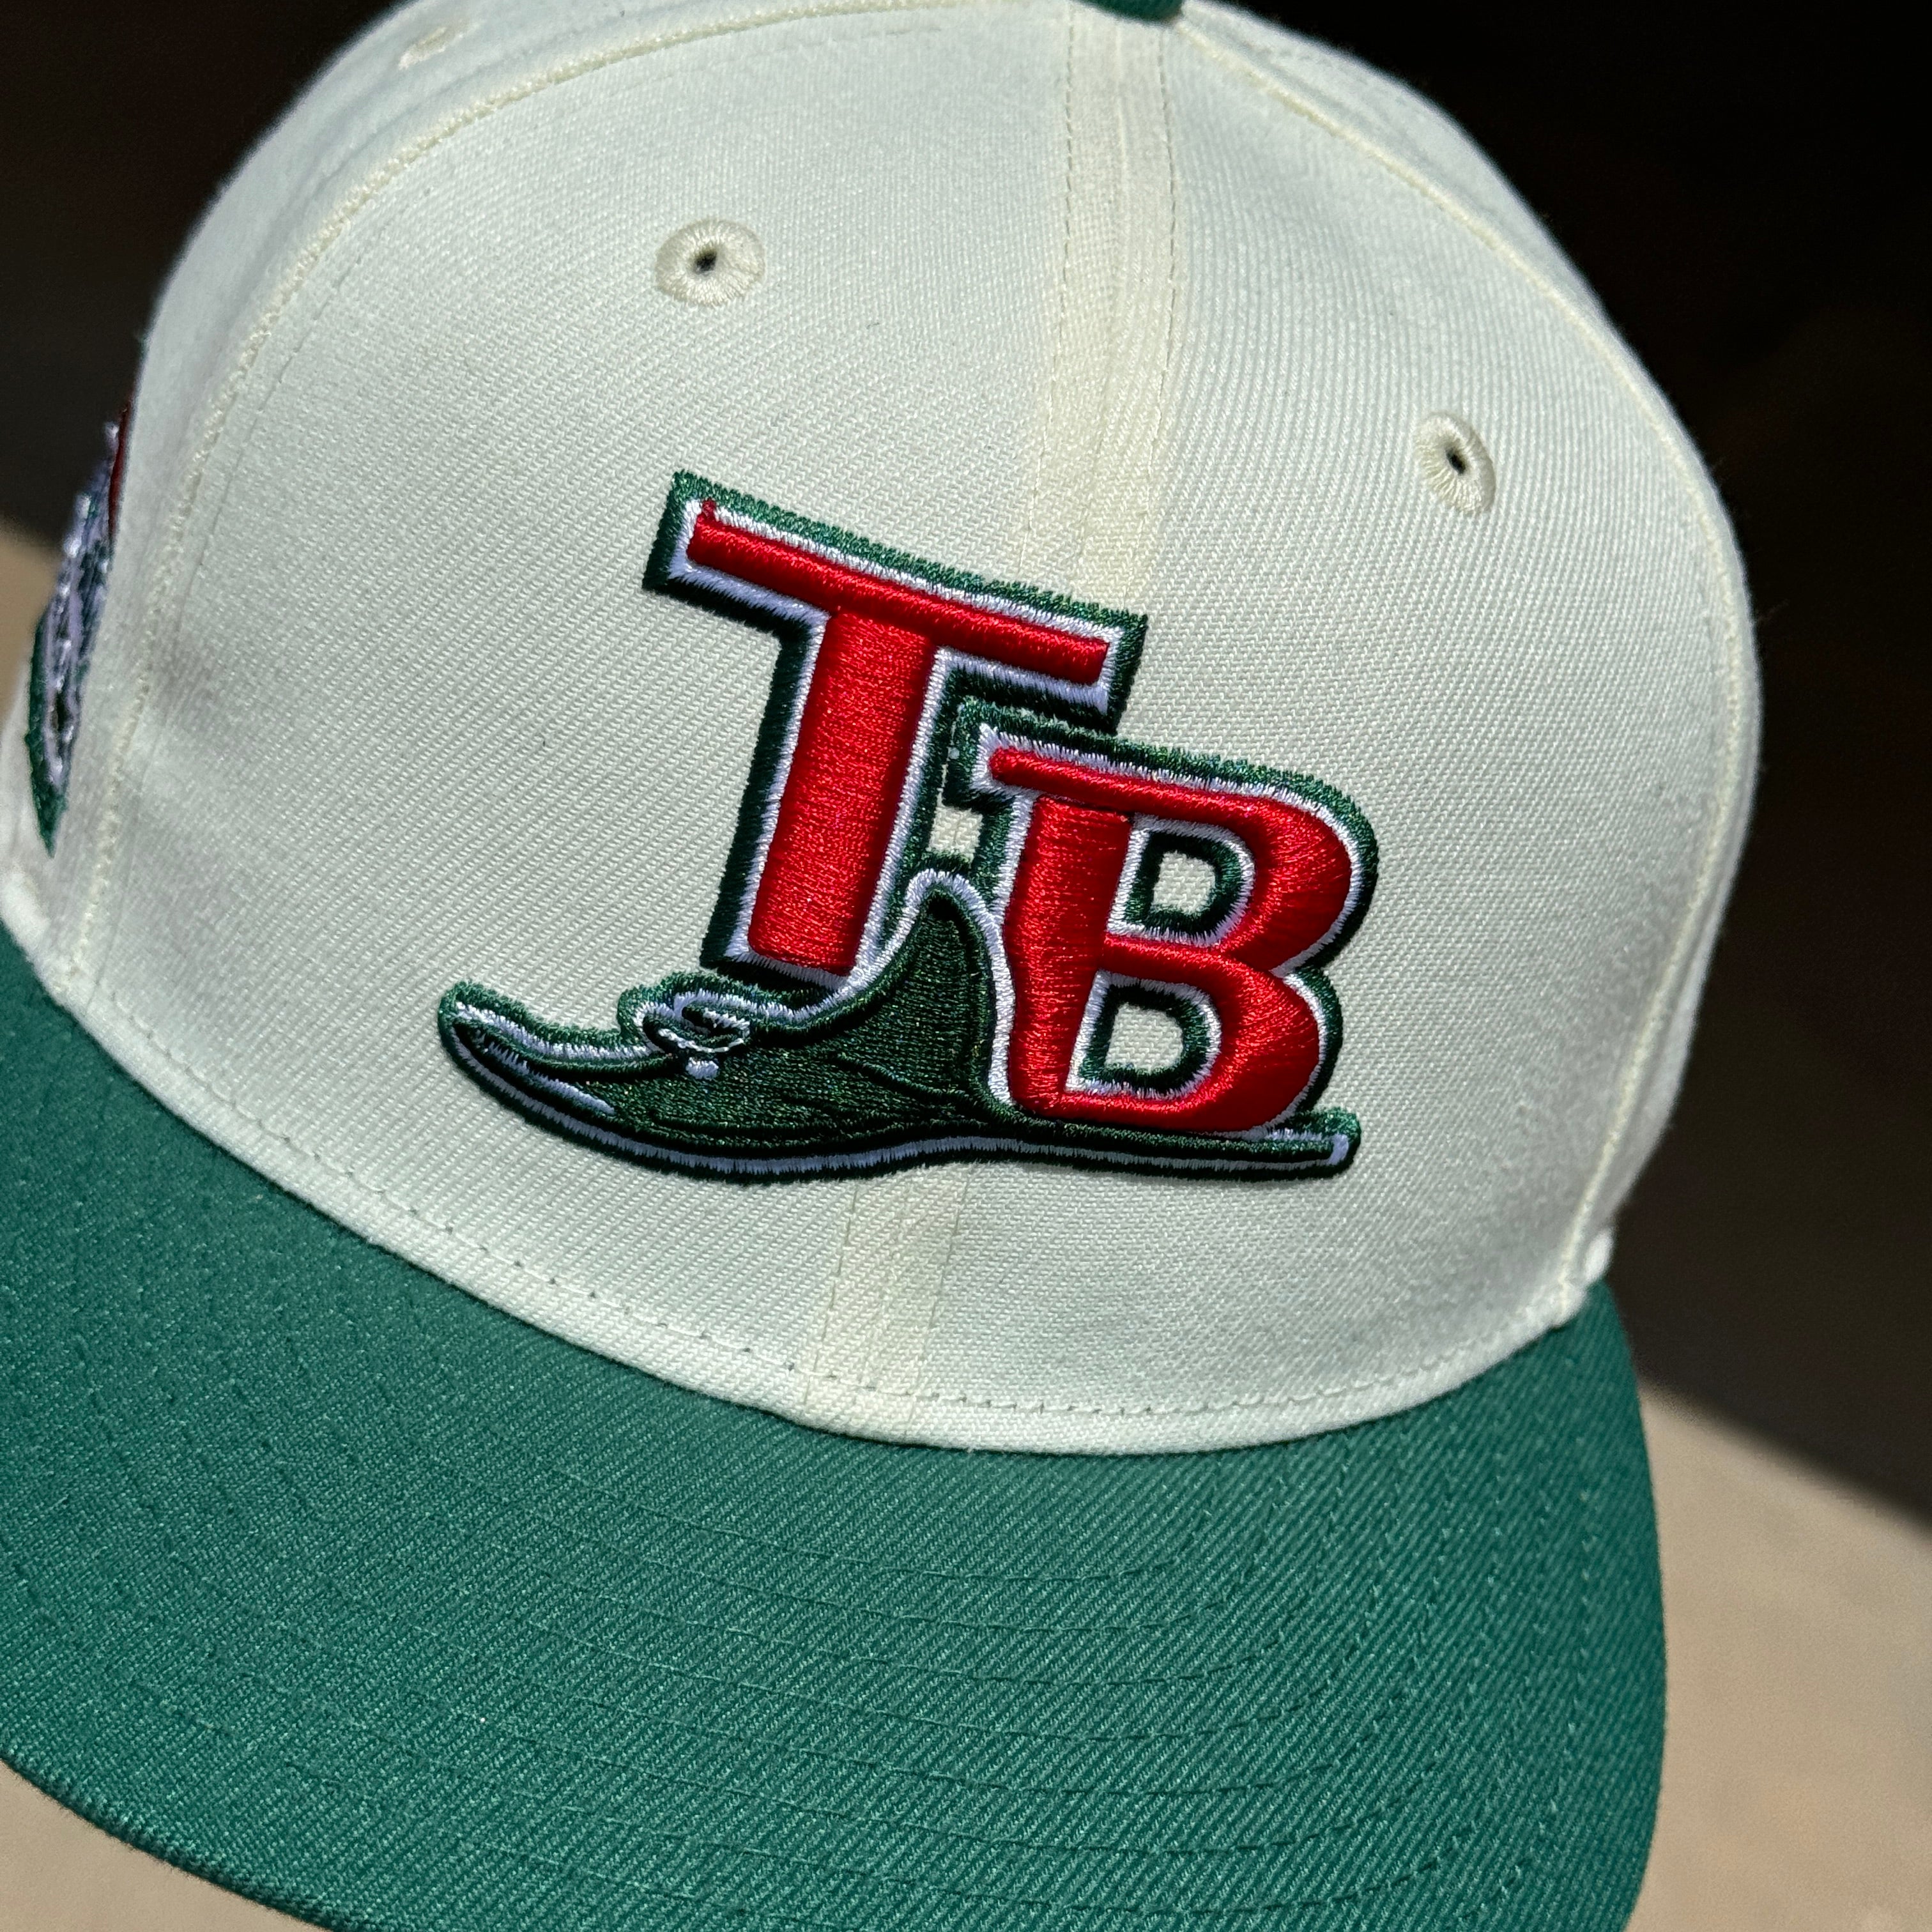 USED 1/8 Chrome Tampa Bay Devil Rays Tropicana Field 59fifty New Era Fitted Hat Cap